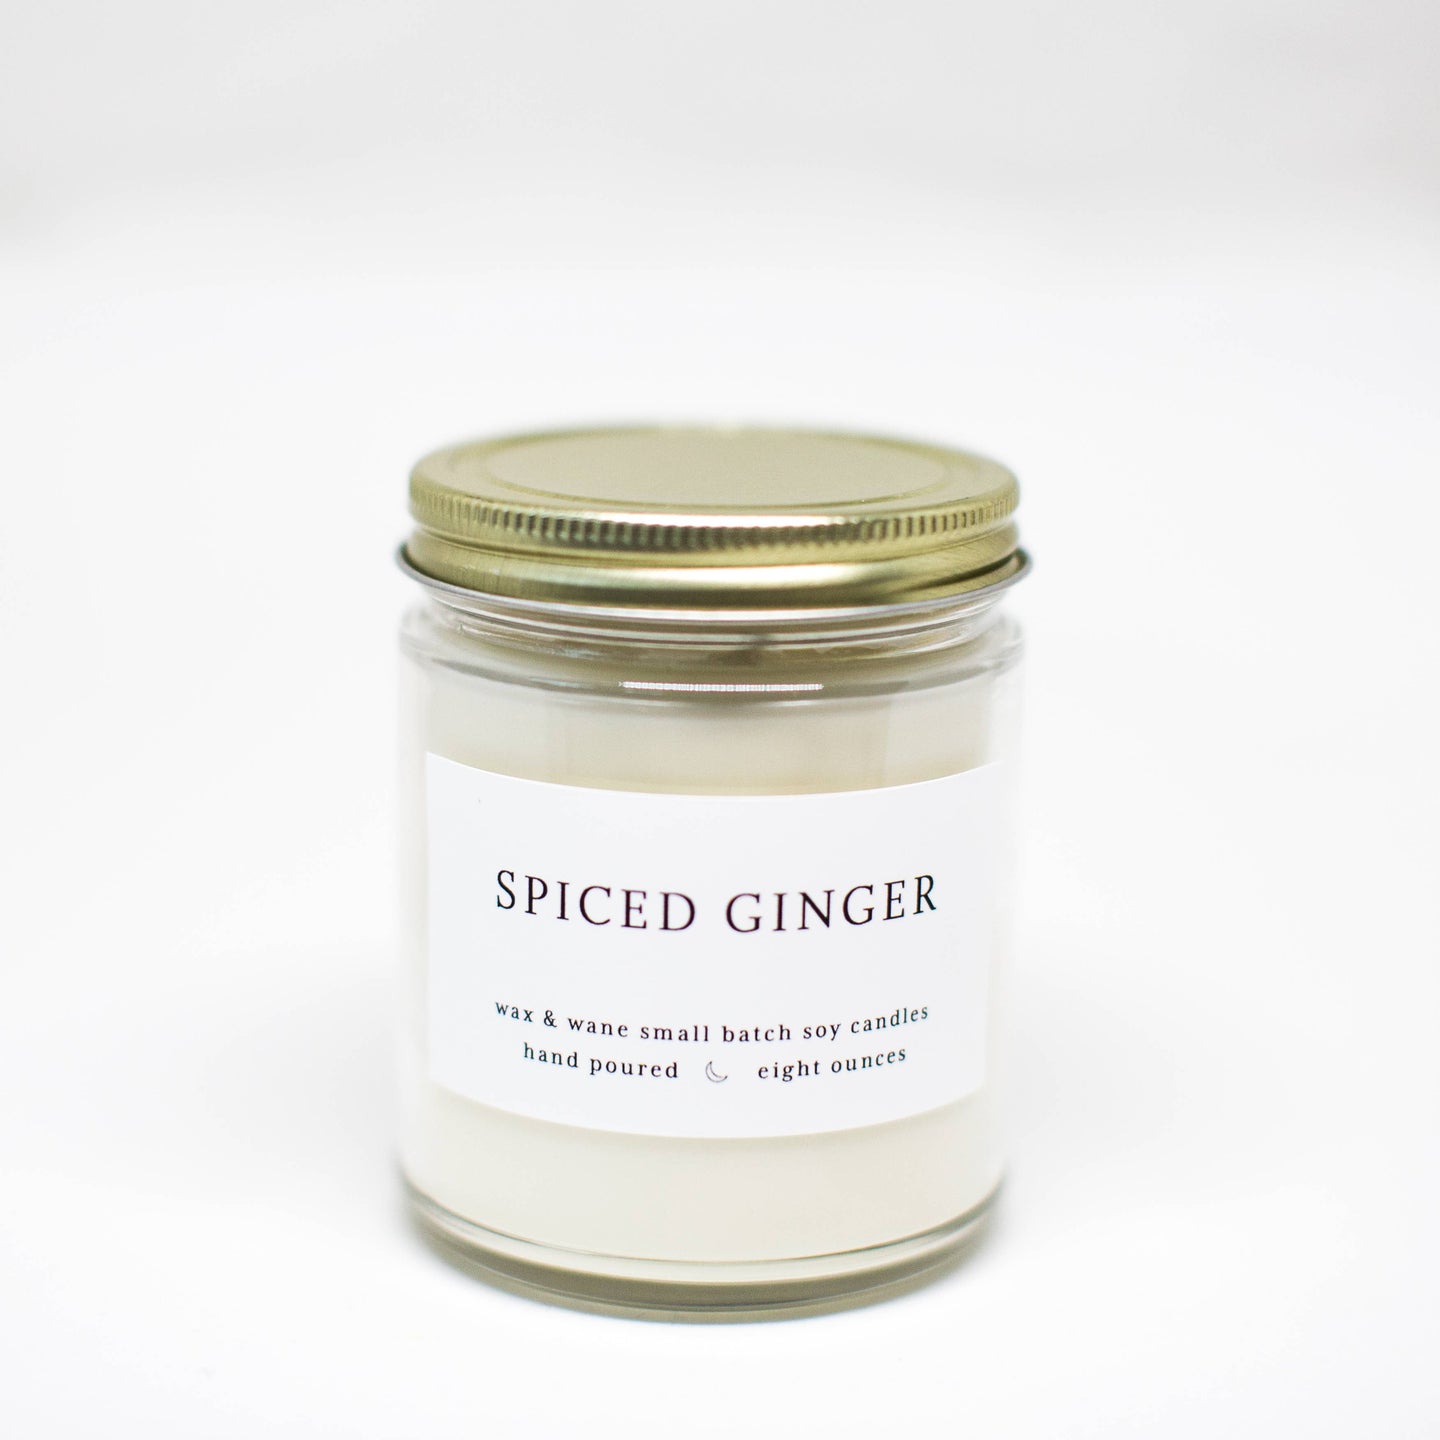 Spiced Ginger Modern Candle